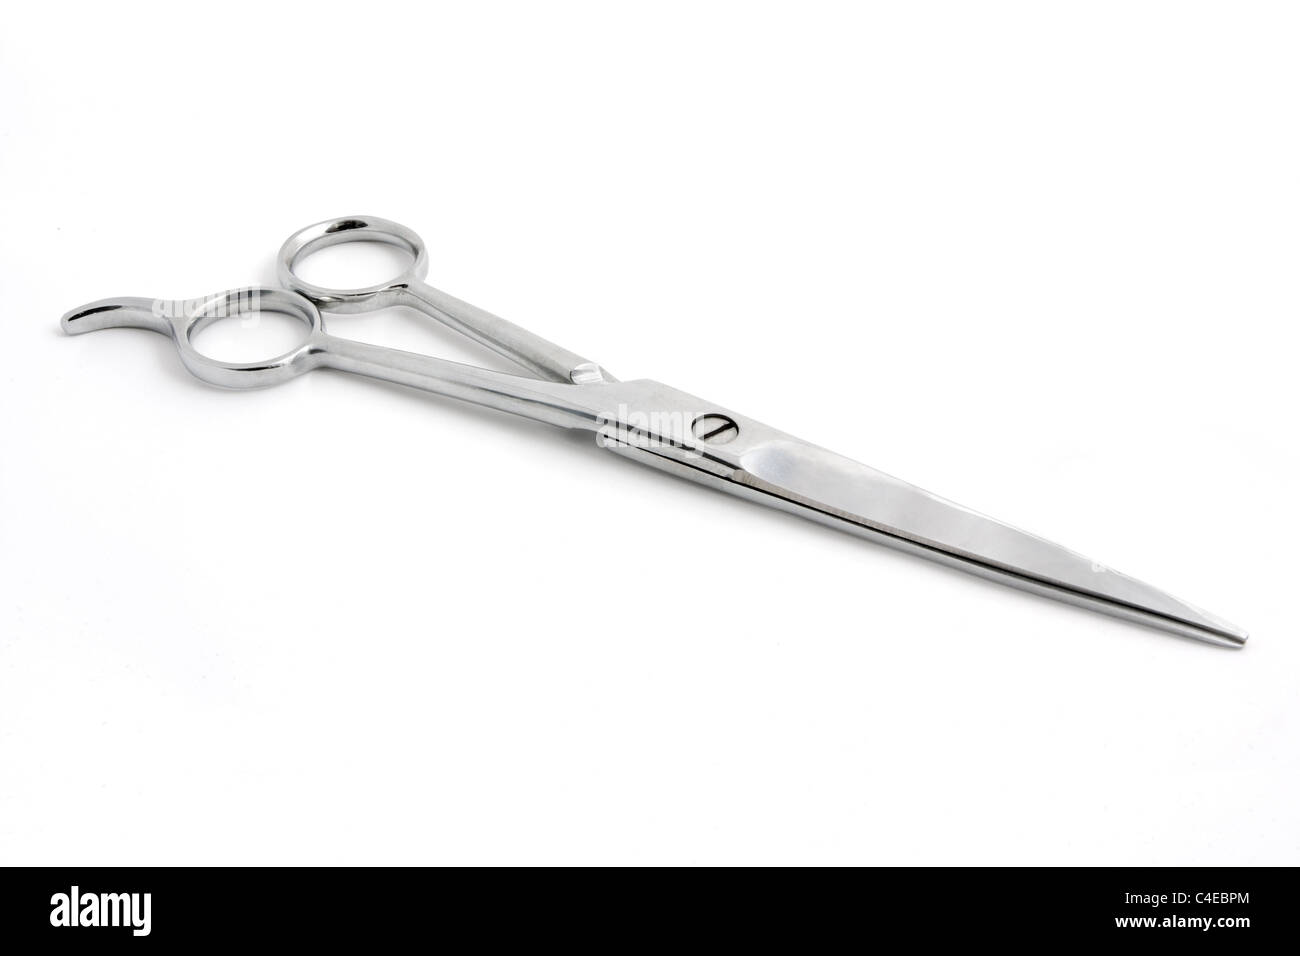 Pair of scissors isolated on a white background Stock Photo